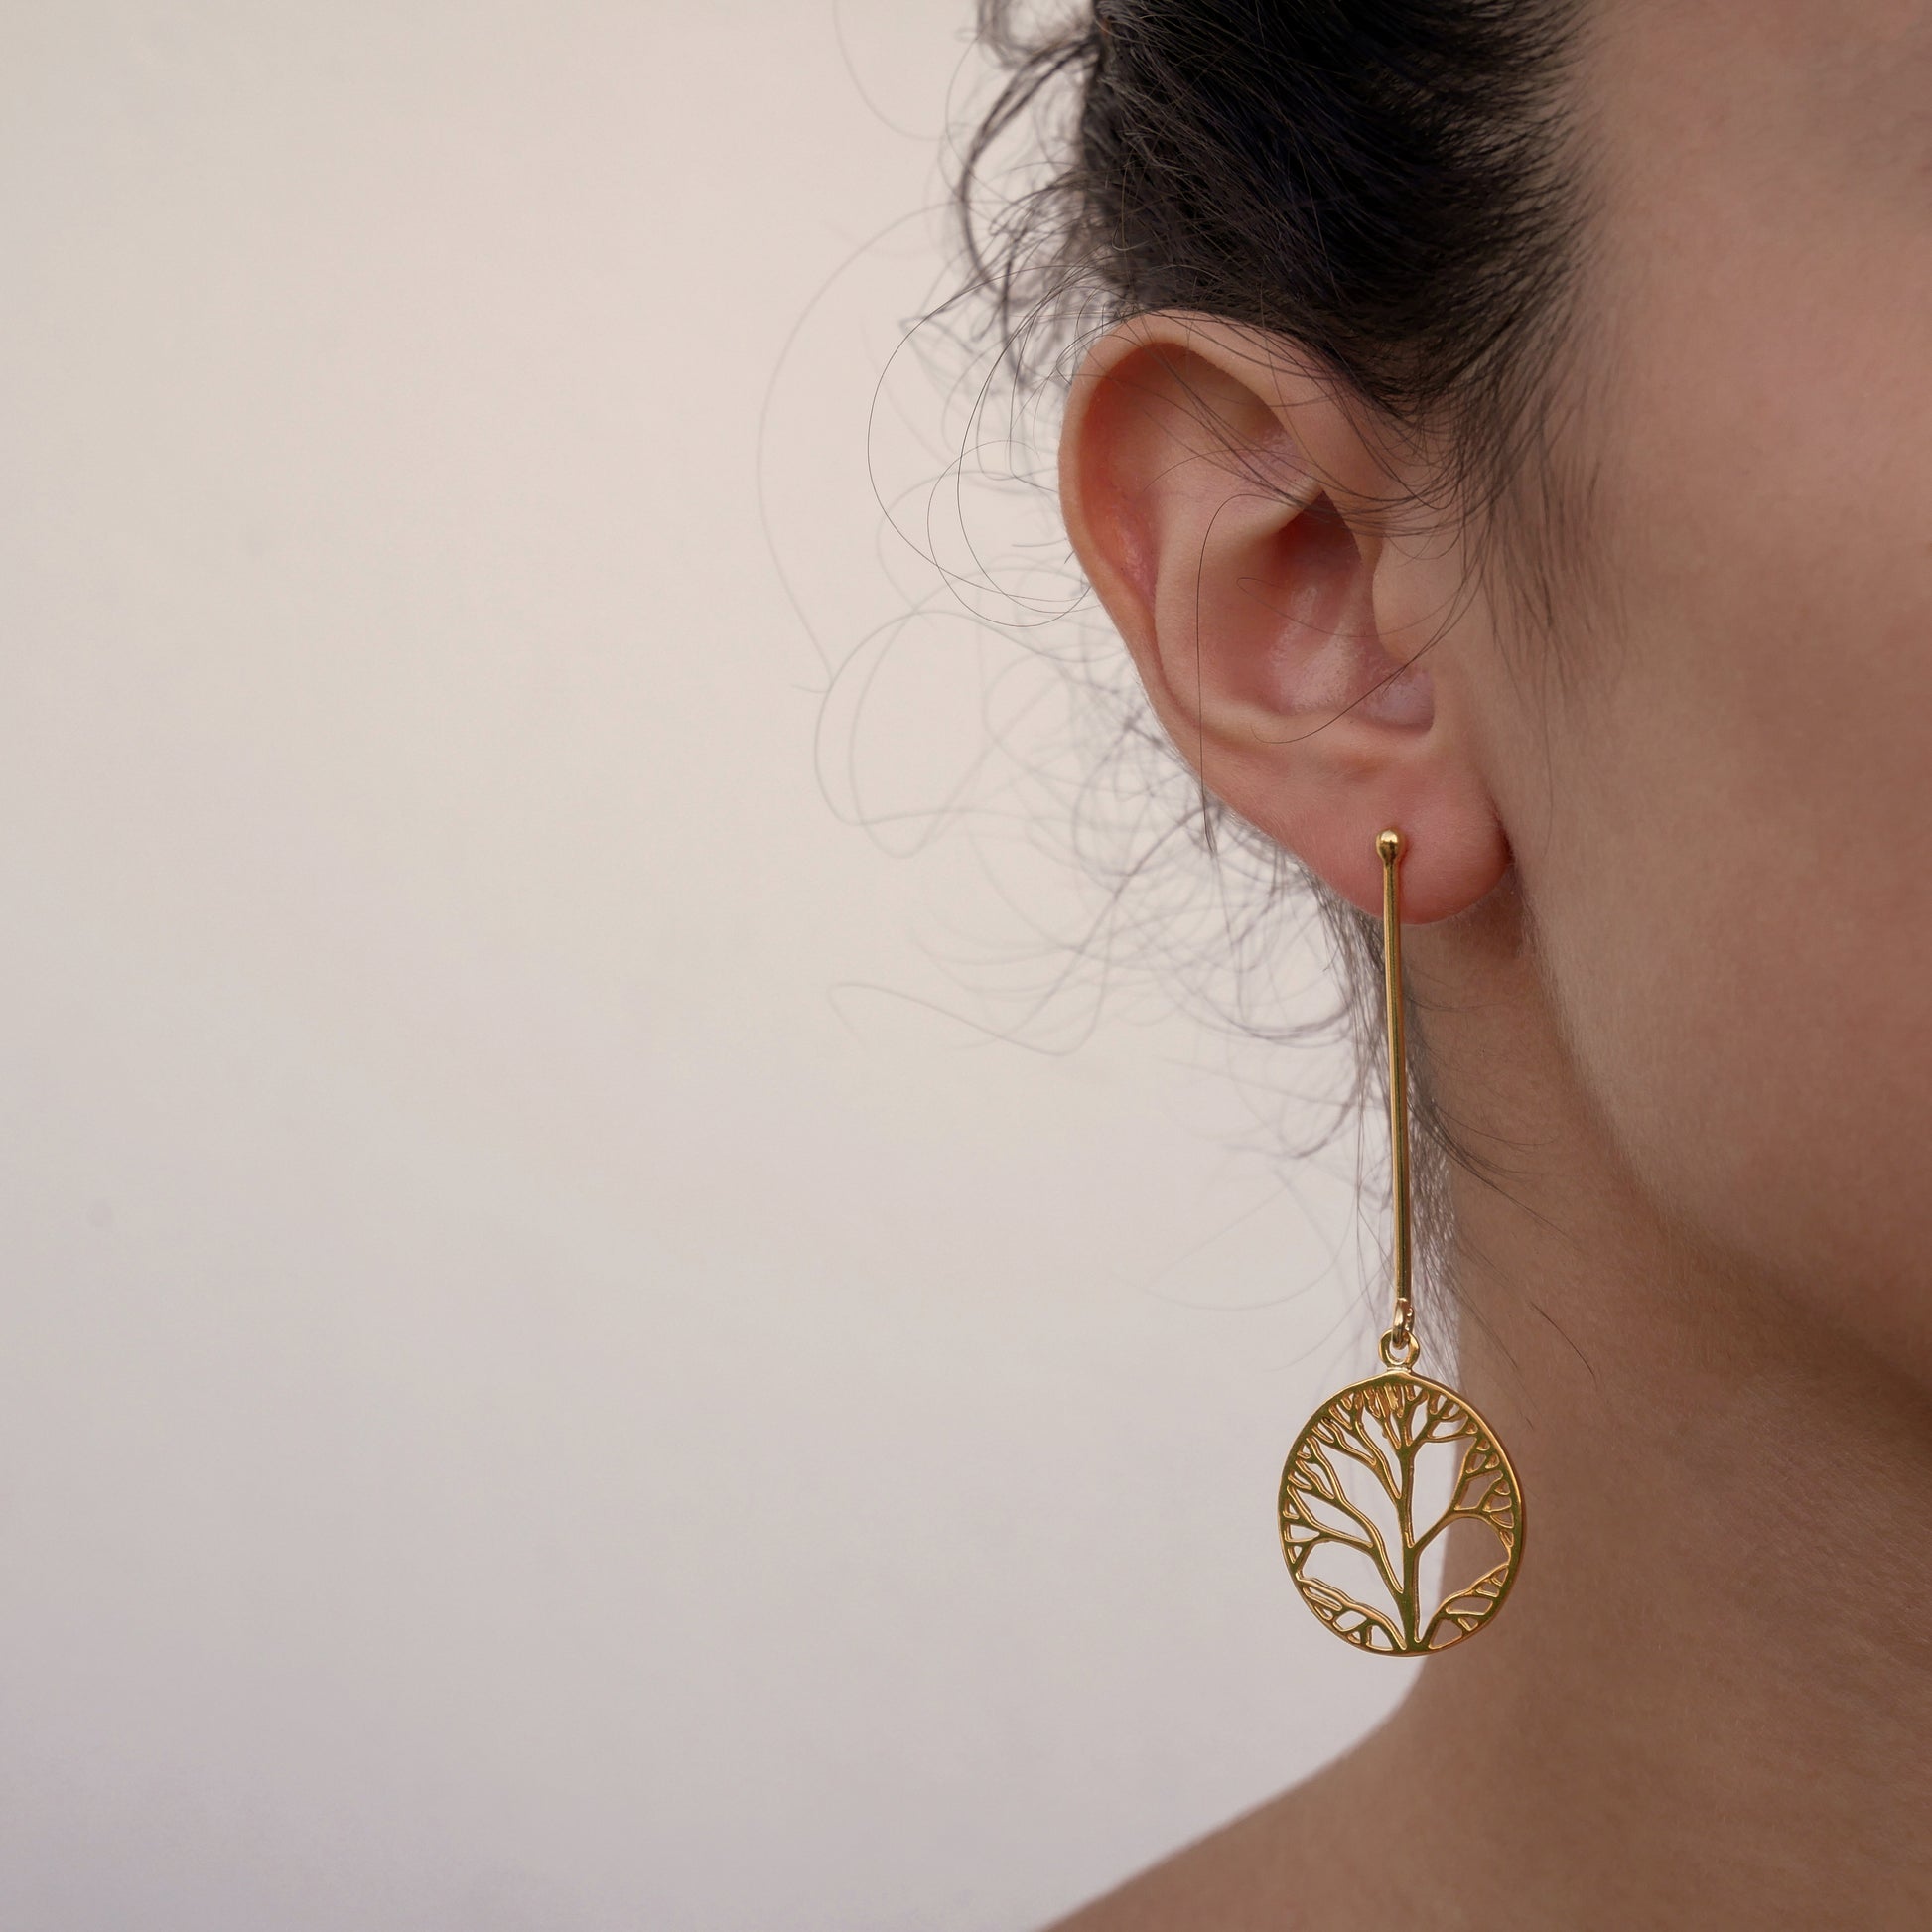 A woman's face wearing a long gold plated silver earring . In a verical massive wire hangs a circle with the design of a tree.  The tree is delicate and beautiful.